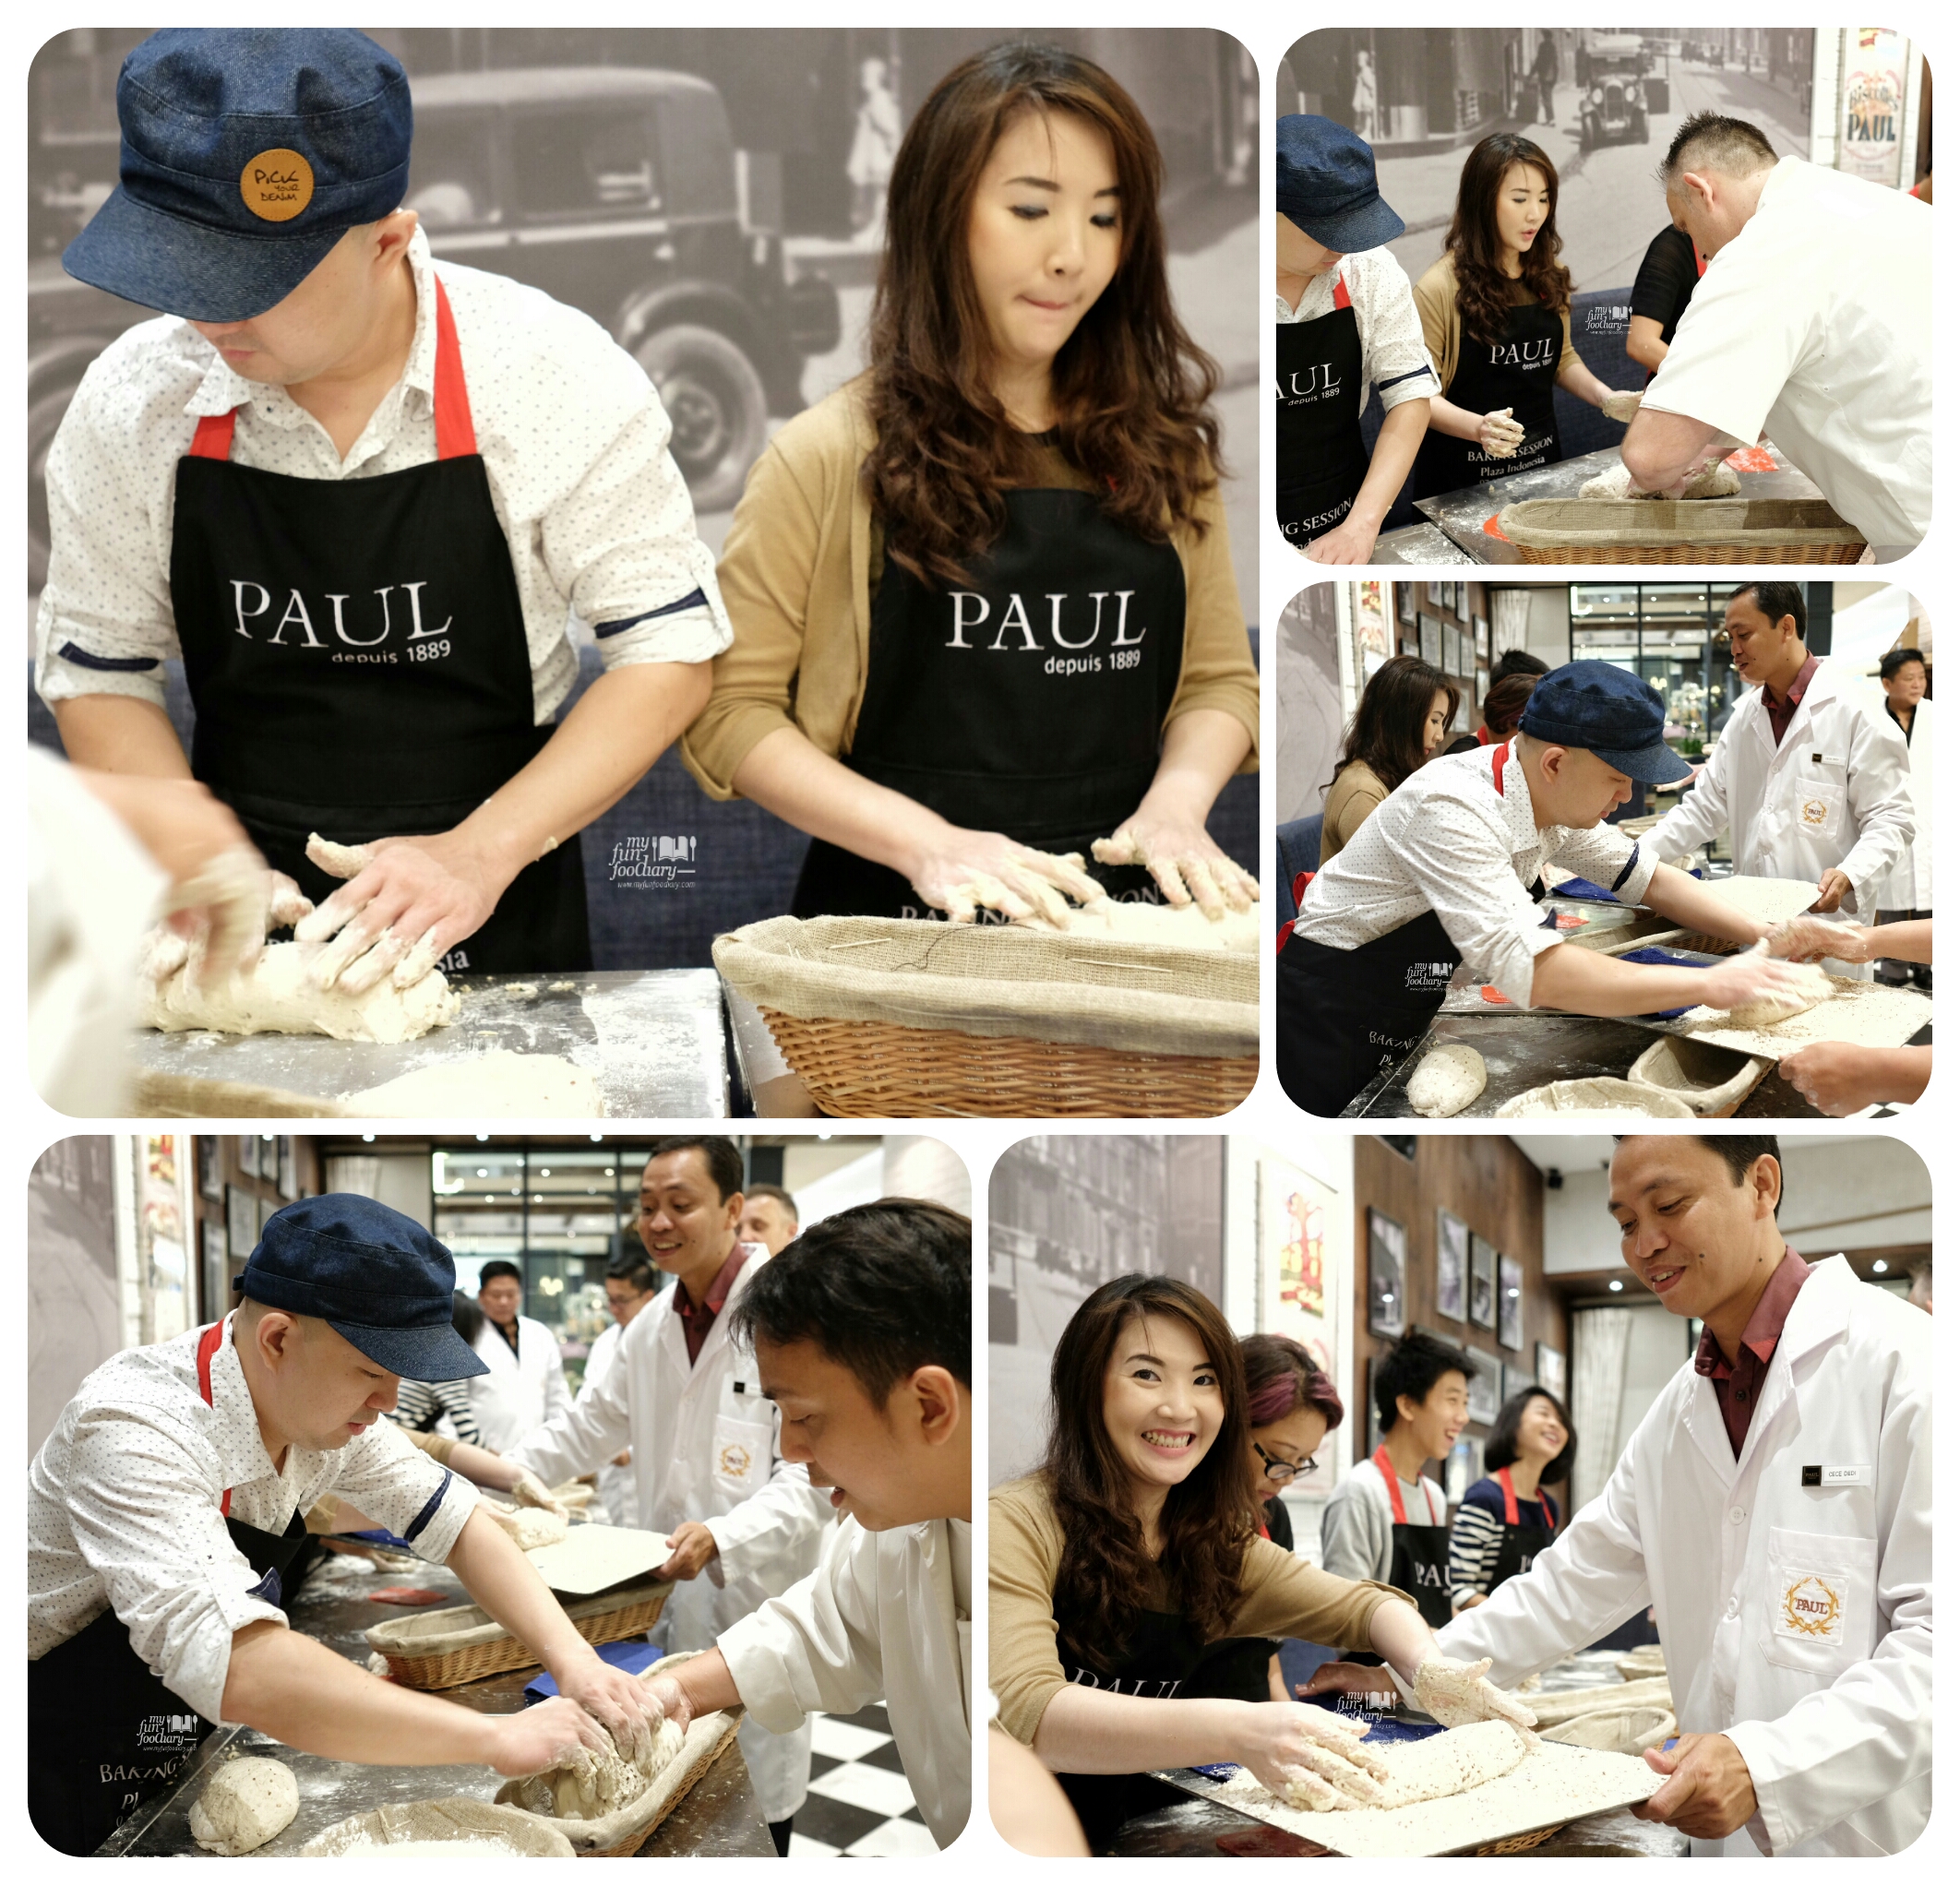 Fun Session Baking Class at Paul Indonesia by Myfunfoodiary